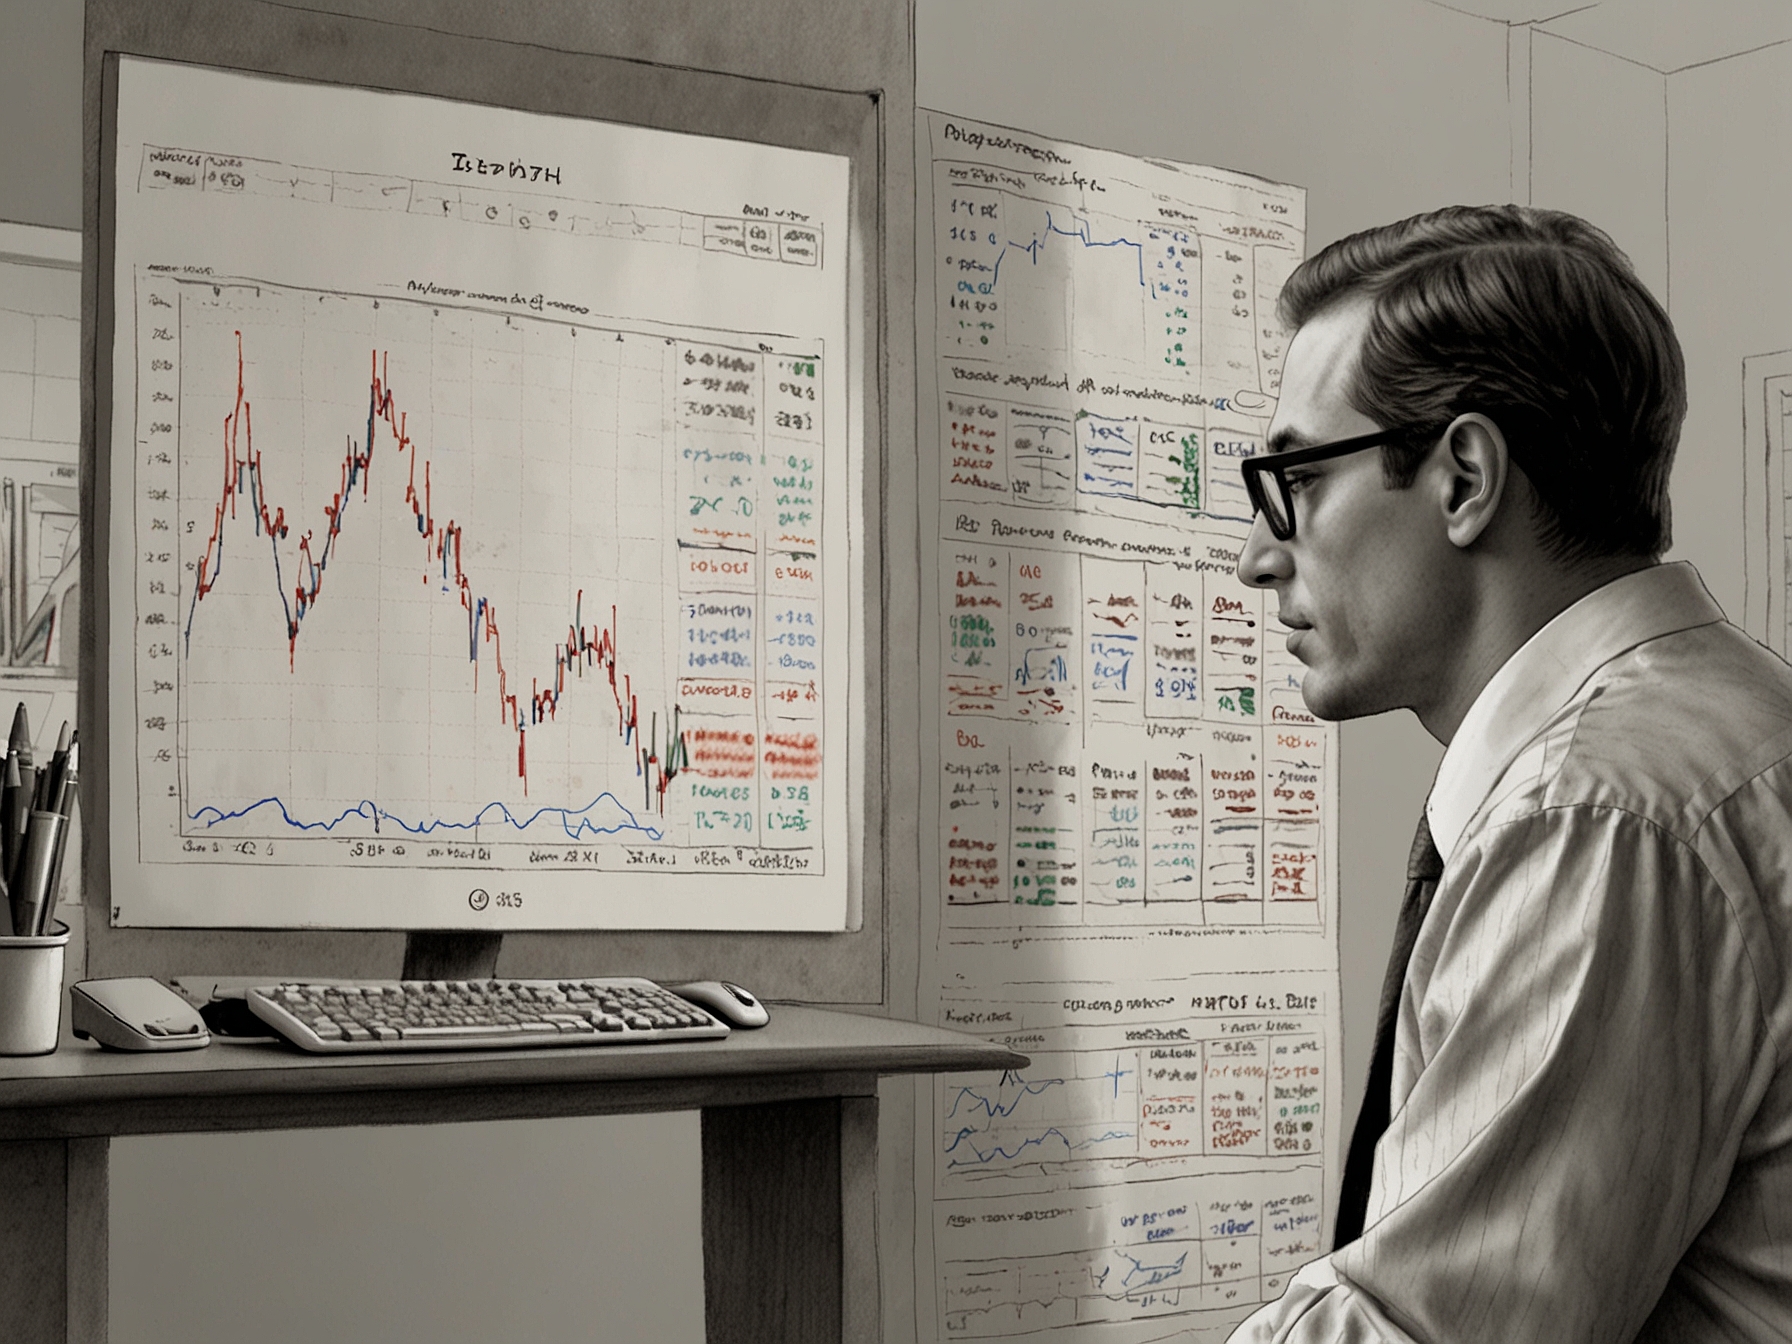 A portfolio manager analyzing financial reports and stock performance charts of pharmaceutical giants Pfizer, Bristol-Myers Squibb, and Gilead Sciences, emphasizing their dividend yield strengths.